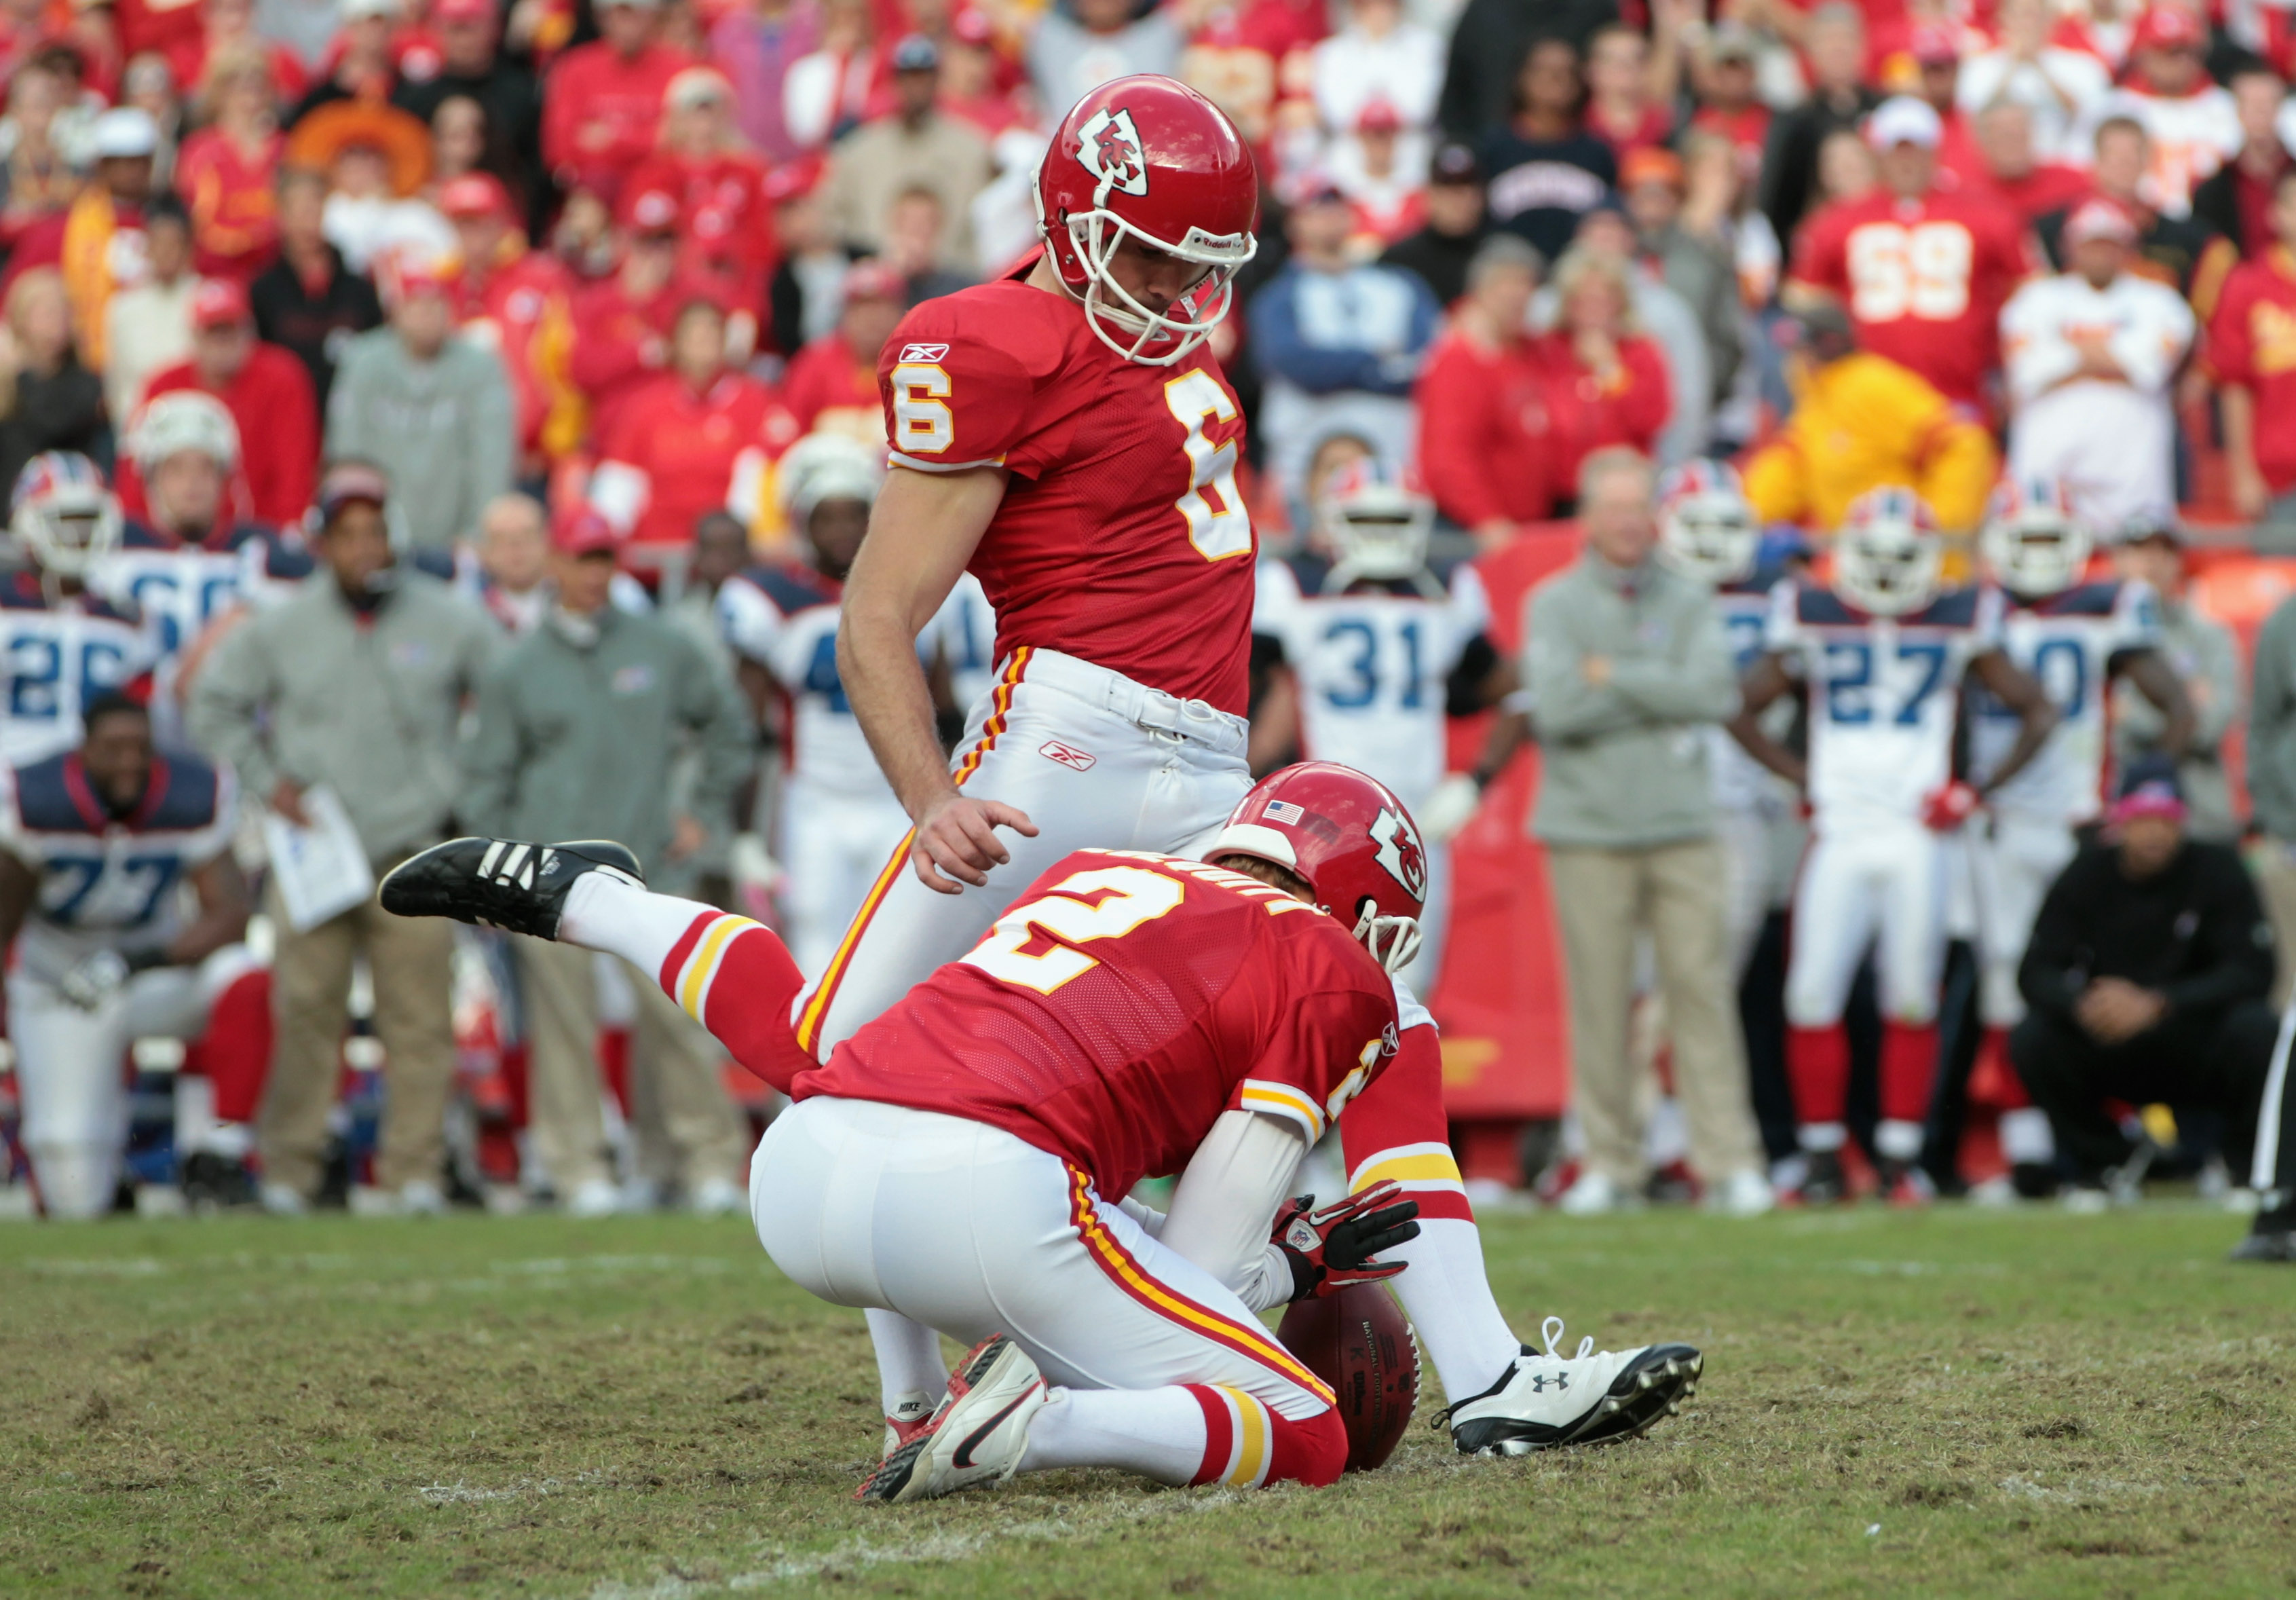 KANSAS CITY, MO - OCTOBER 31:  Kicker Ryan Succop #6 of the Kansas City Chiefs kicks a field goal in overtime to win the game against the Buffalo Bills on October 31, 2010  at Arrowhead Stadium in Kansas City, Missouri.  (Photo by Jamie Squire/Getty Image